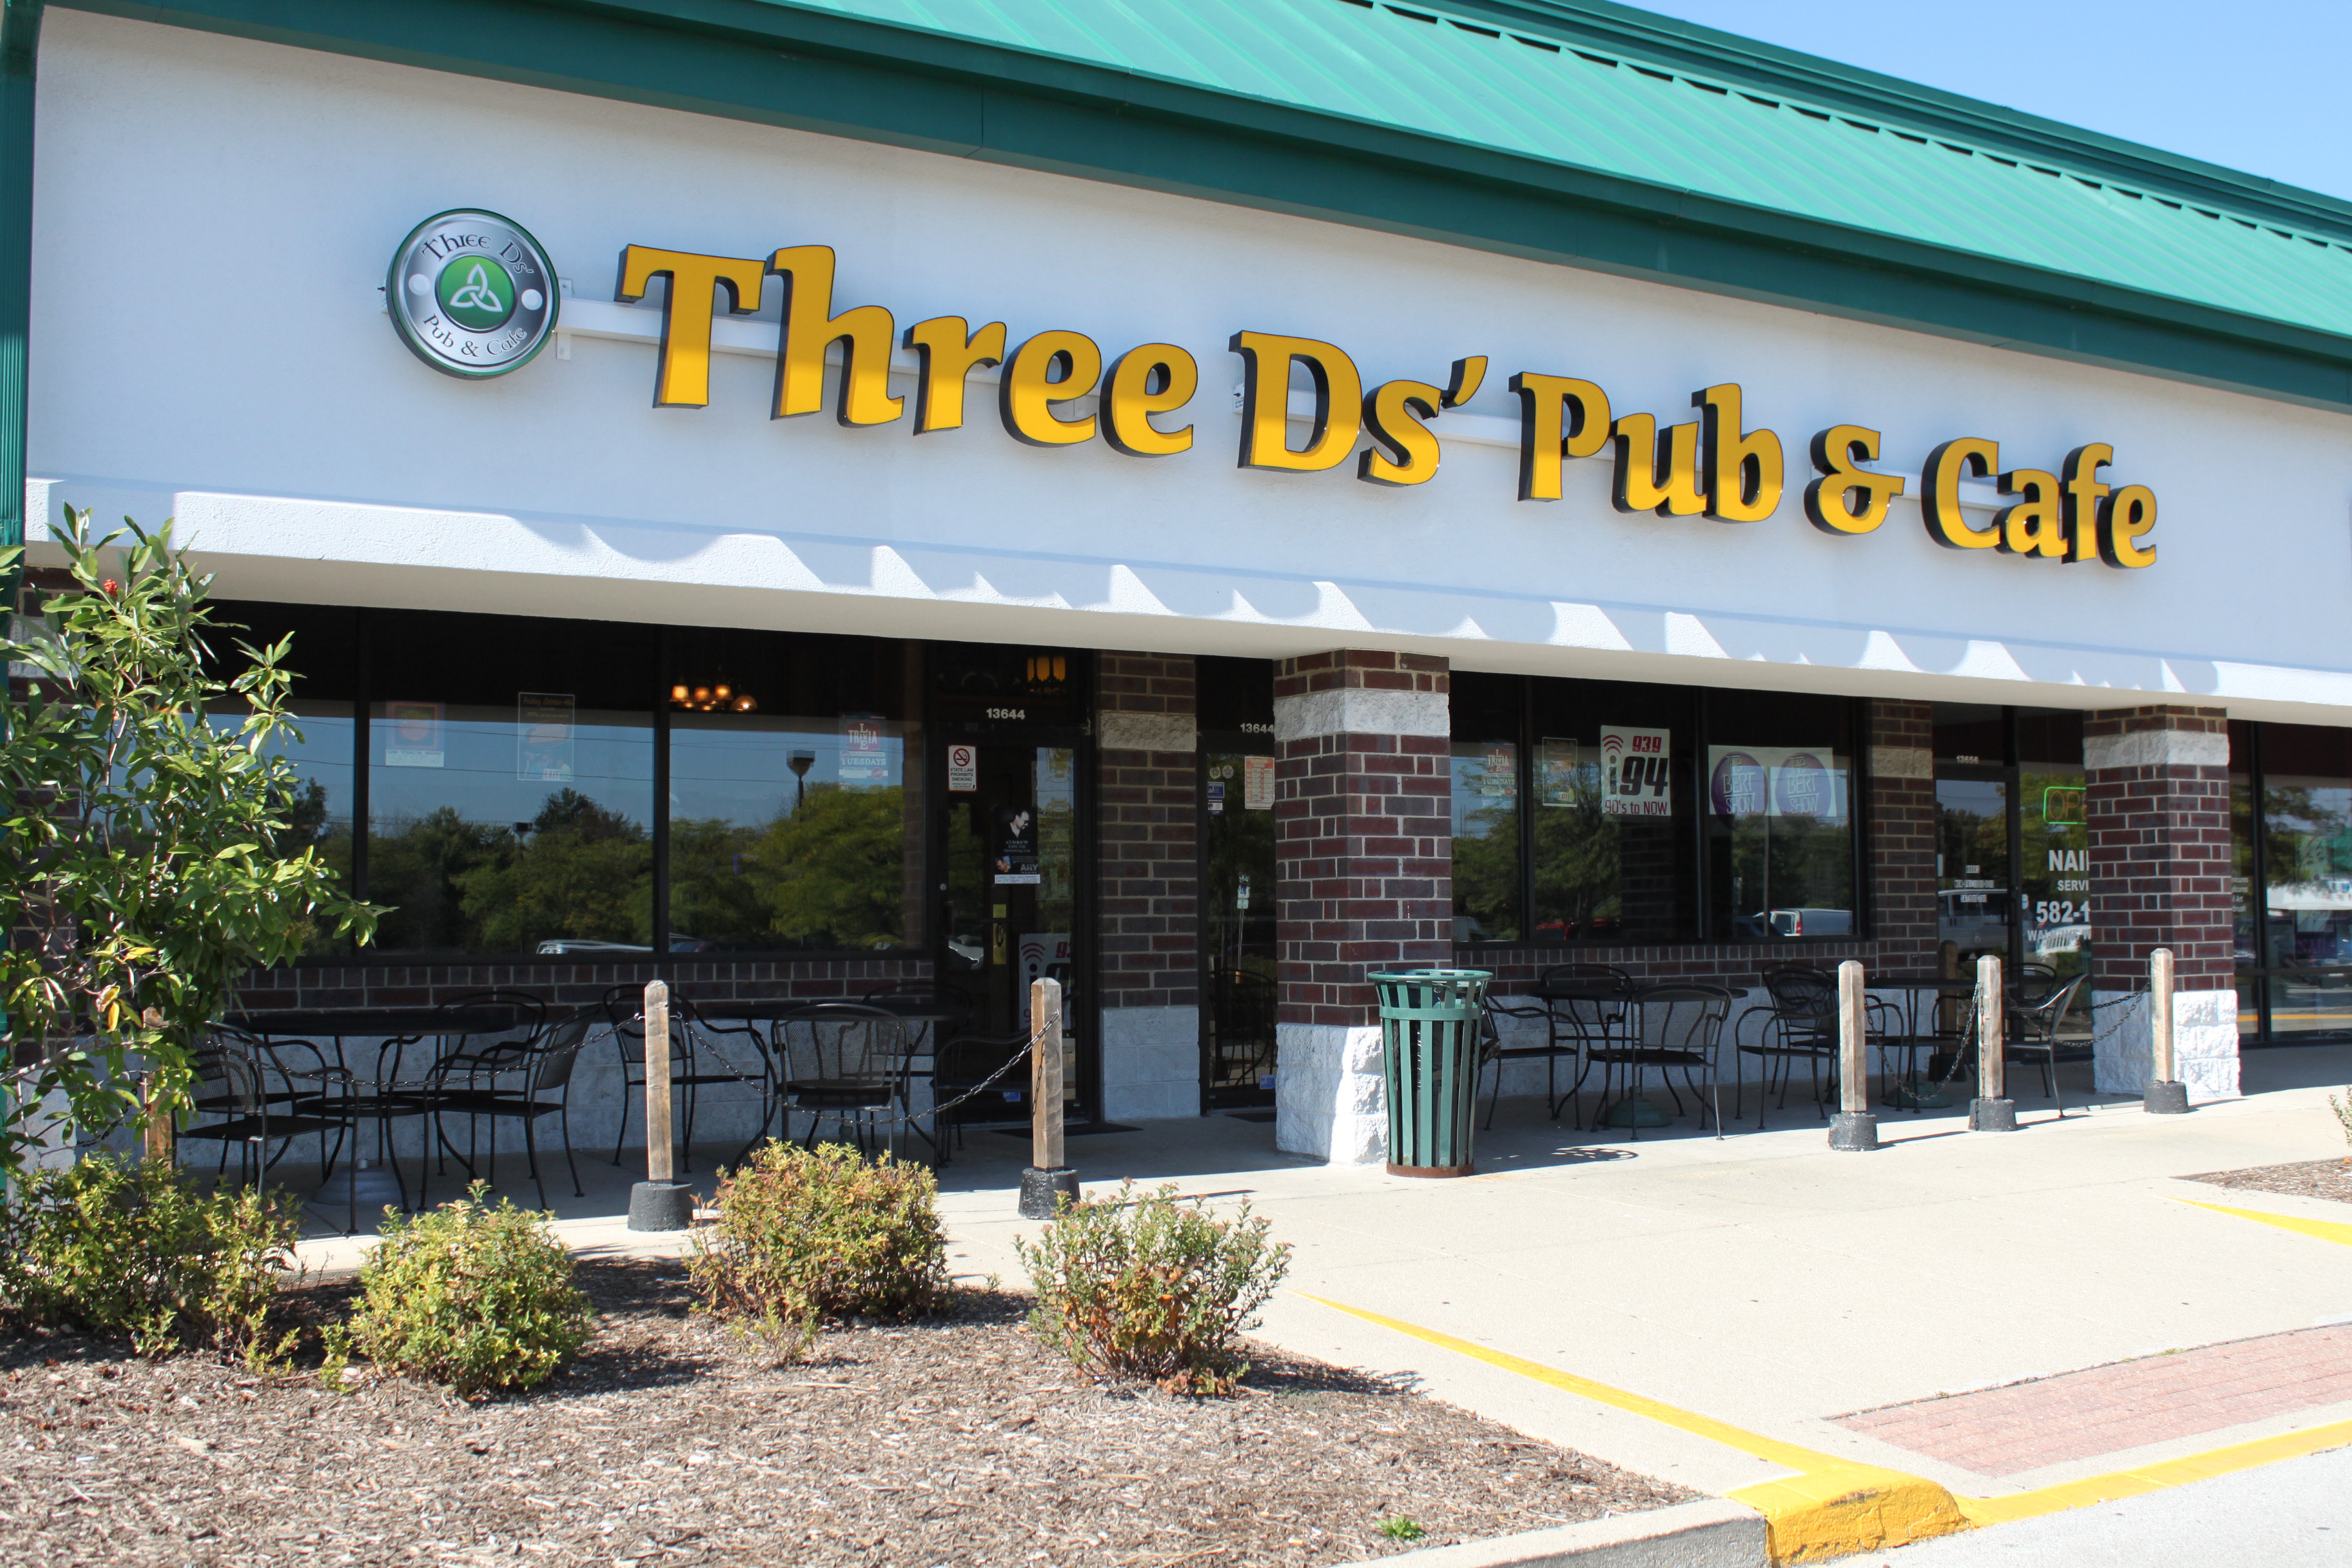 Three Ds’ Pub and Café will begin offering all-ages shows this summer. (File photo)